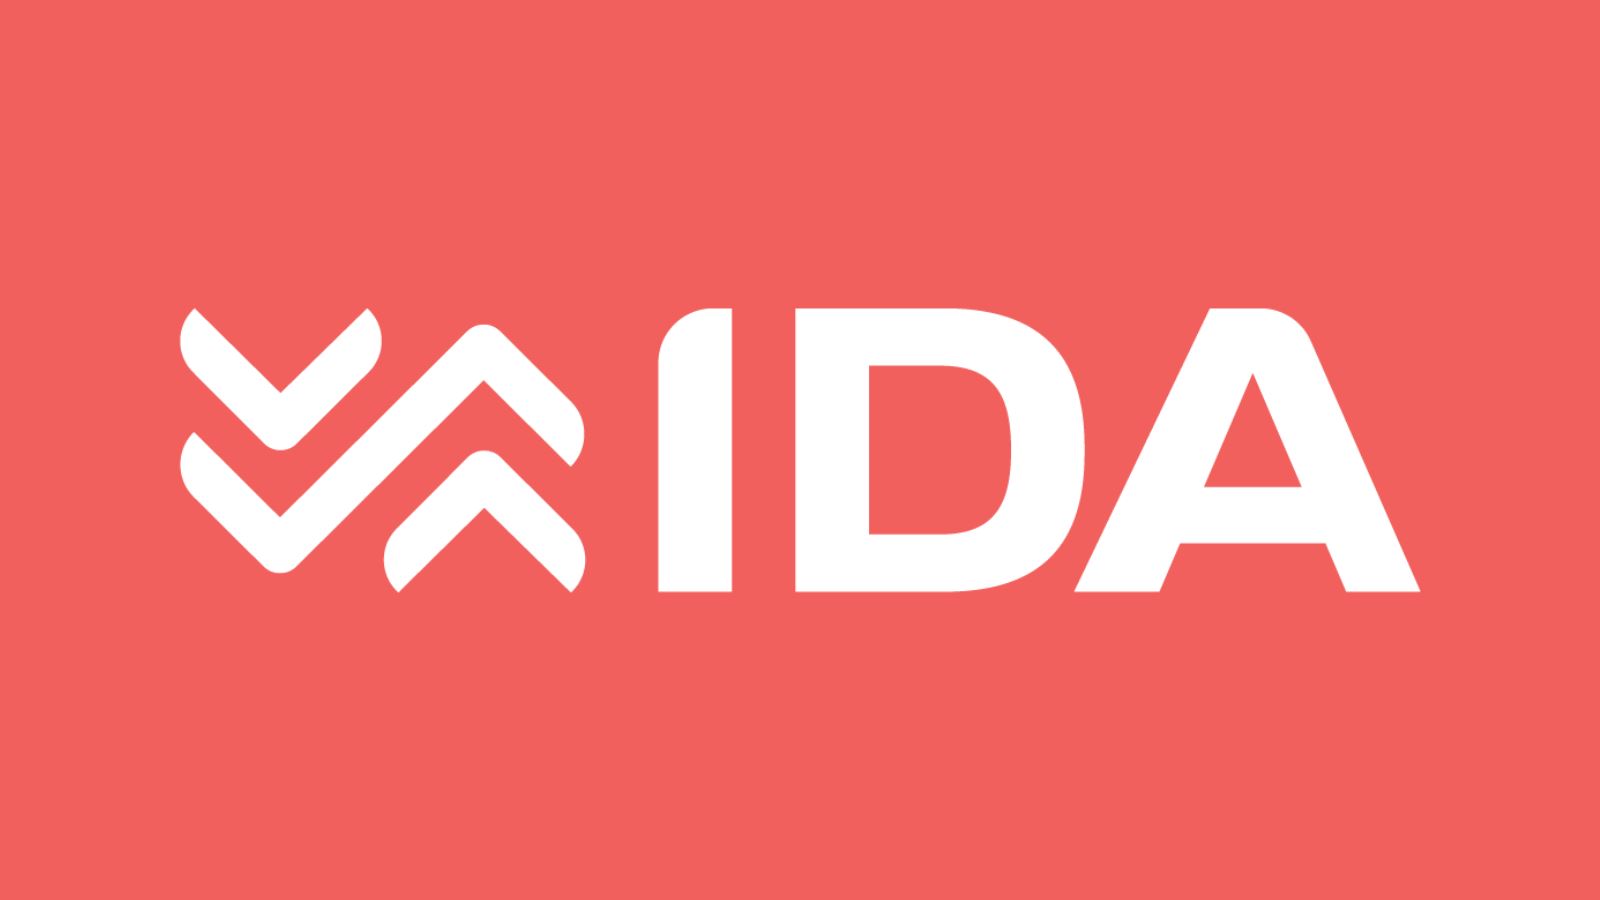 OFFICIAL RELEASE: IDA SPORTS’ LAURA YOUNGSON ANNOUNCES PREGNANCY AND SETS PRECEDENT FOR FEMALE FOUNDERS BALANCING ENTREPRENEURSHIP AND MOTHERHOOD